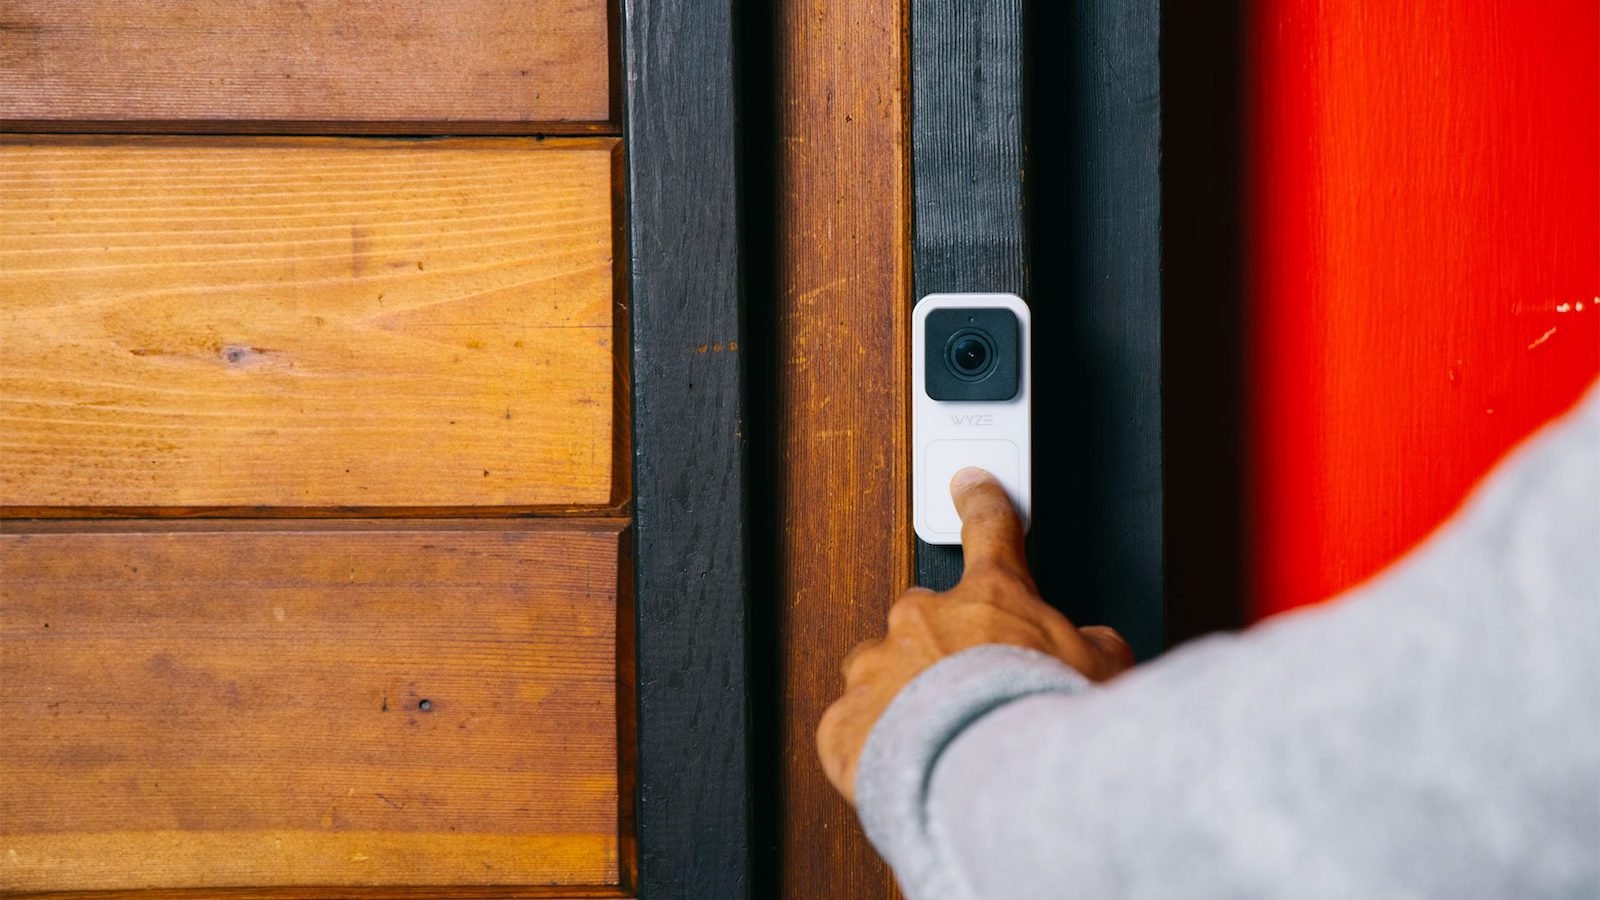 Wyze Video Doorbell lets you see visitors even when you’re not at home